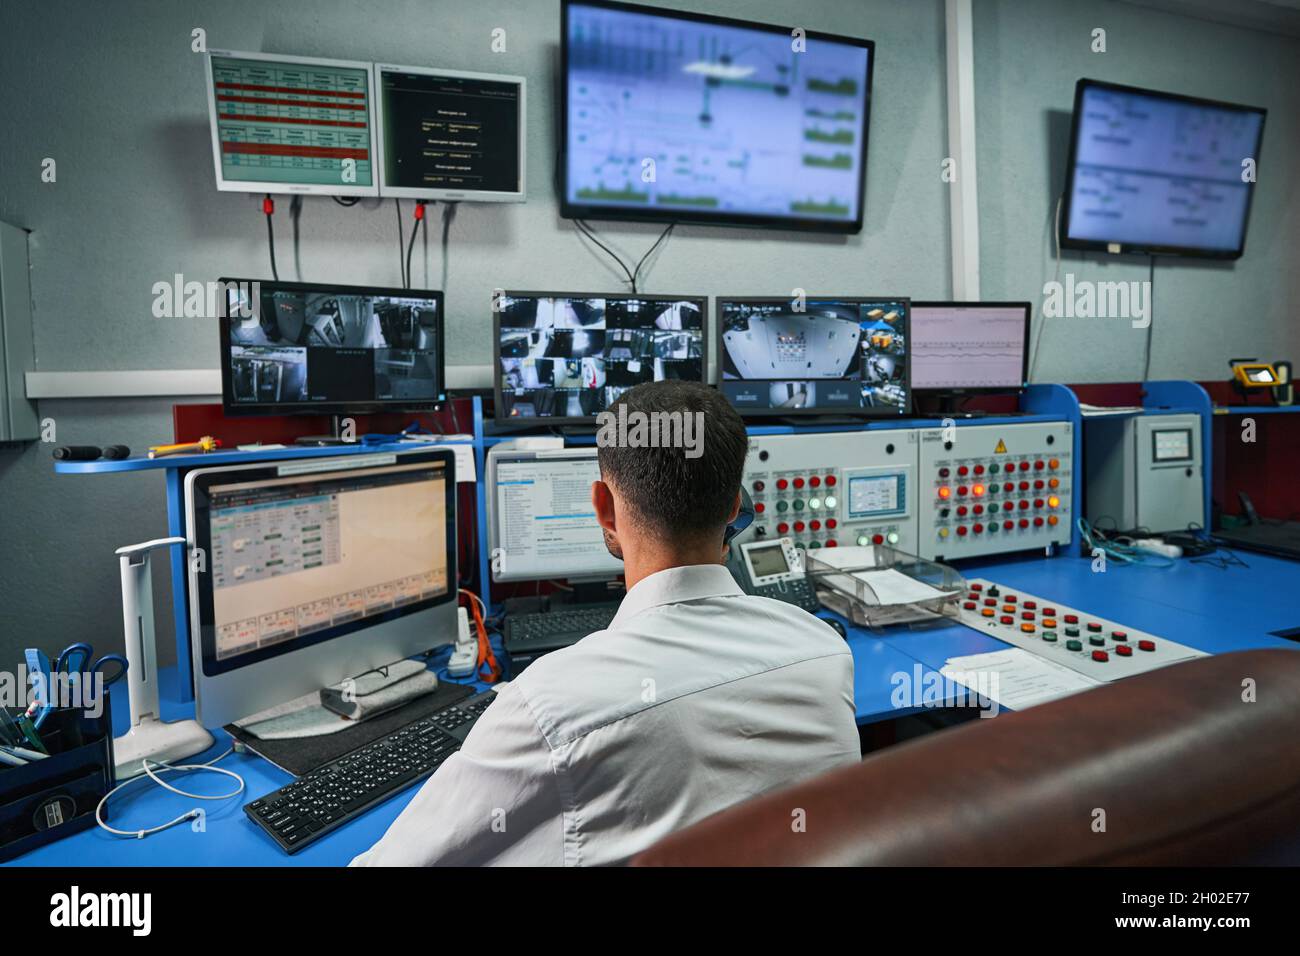 Server administrator looking after data center rooms through monitors Stock Photo